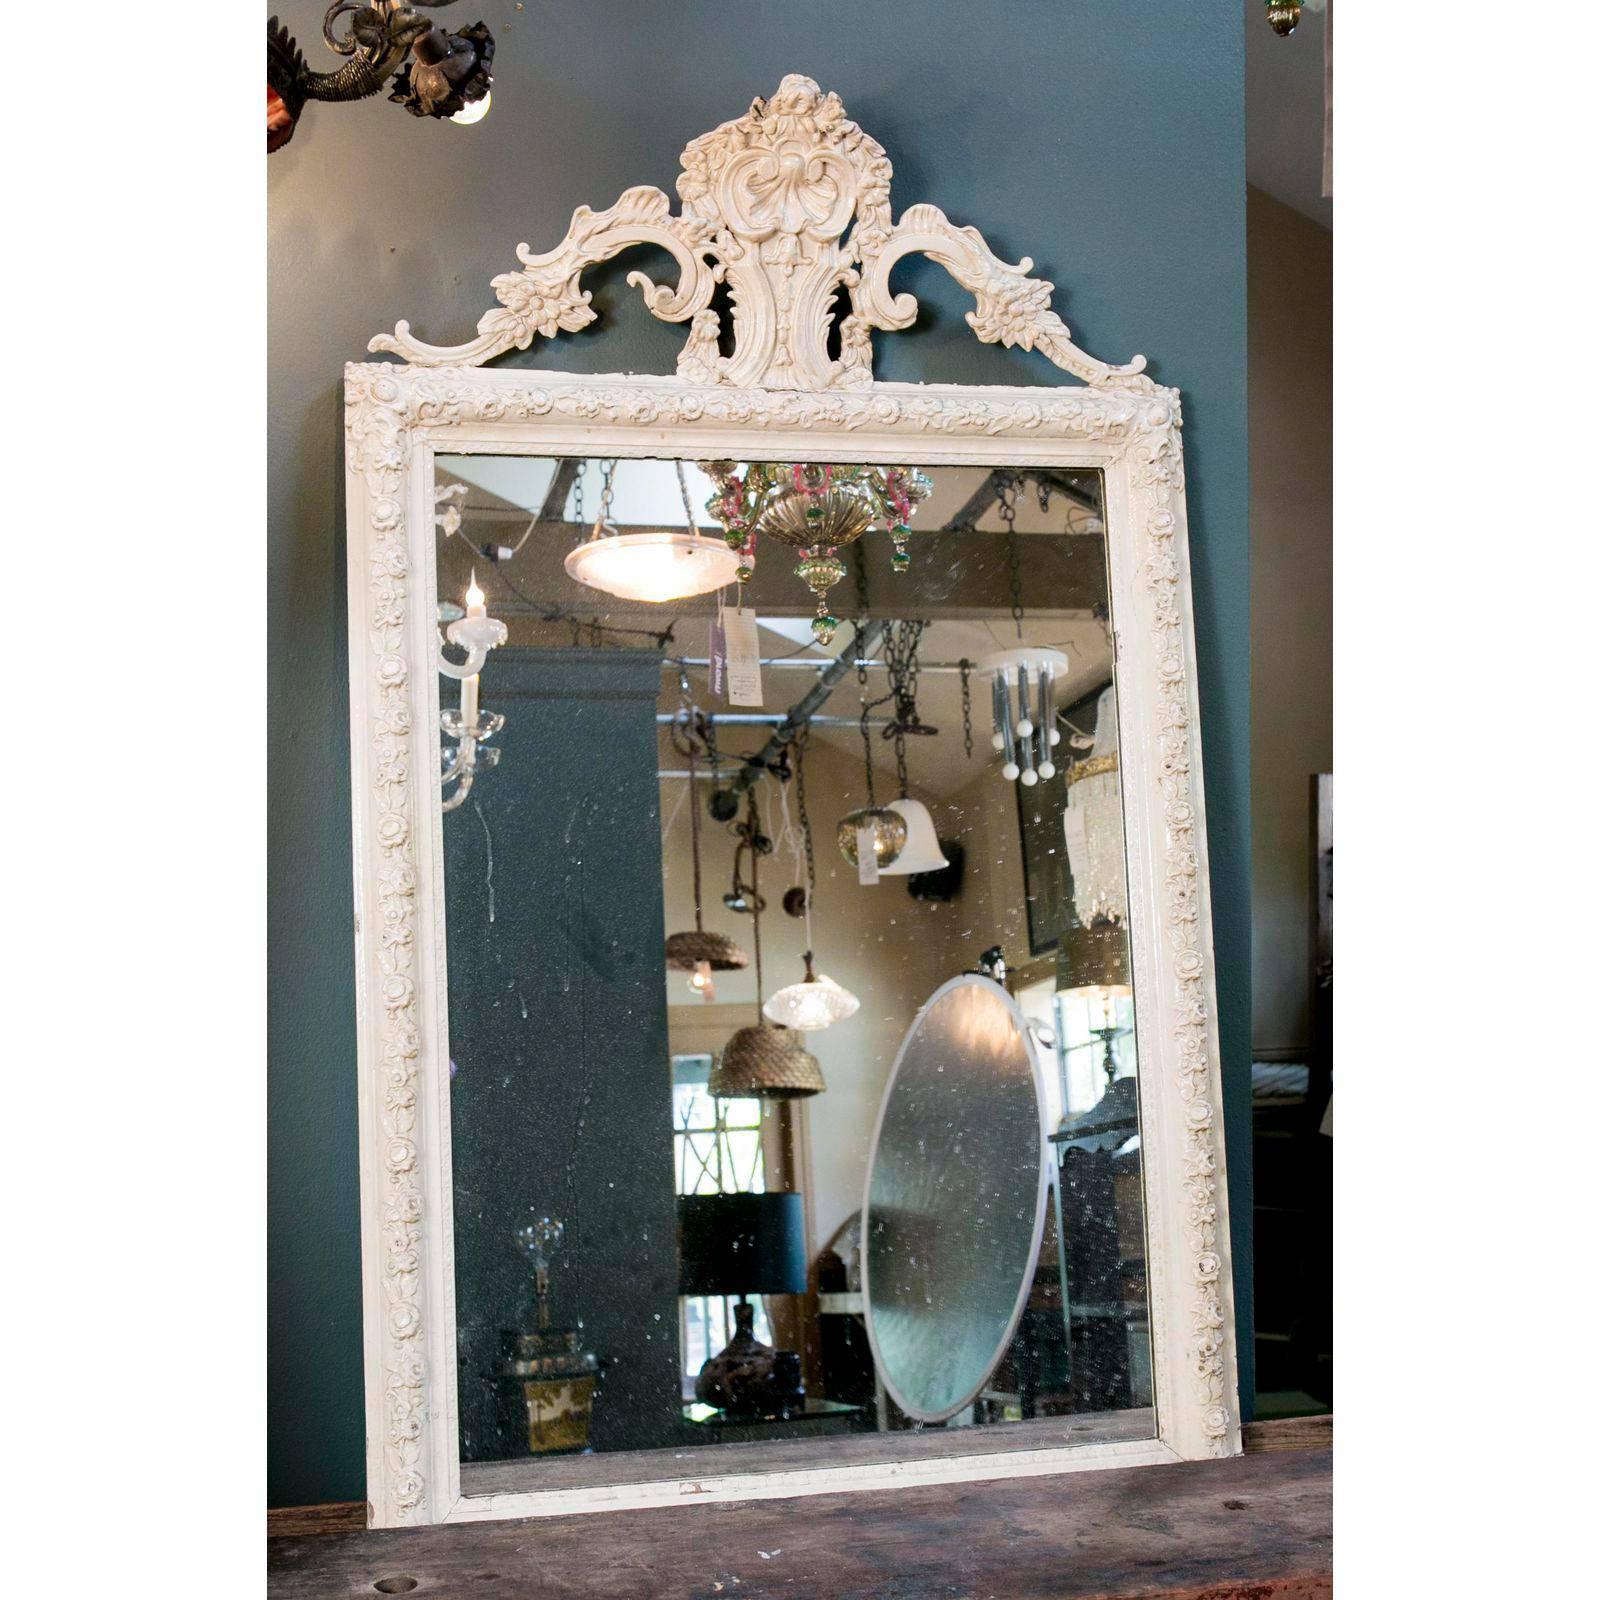 Beautiful, large antique Rococo-style French mirror with floral motif, circa 1900. Carved tassels line the base of the mirror and a stylized seashell rests in the apex, flanked by swags of flowers. Original paint in a creamy white lacquer over wood